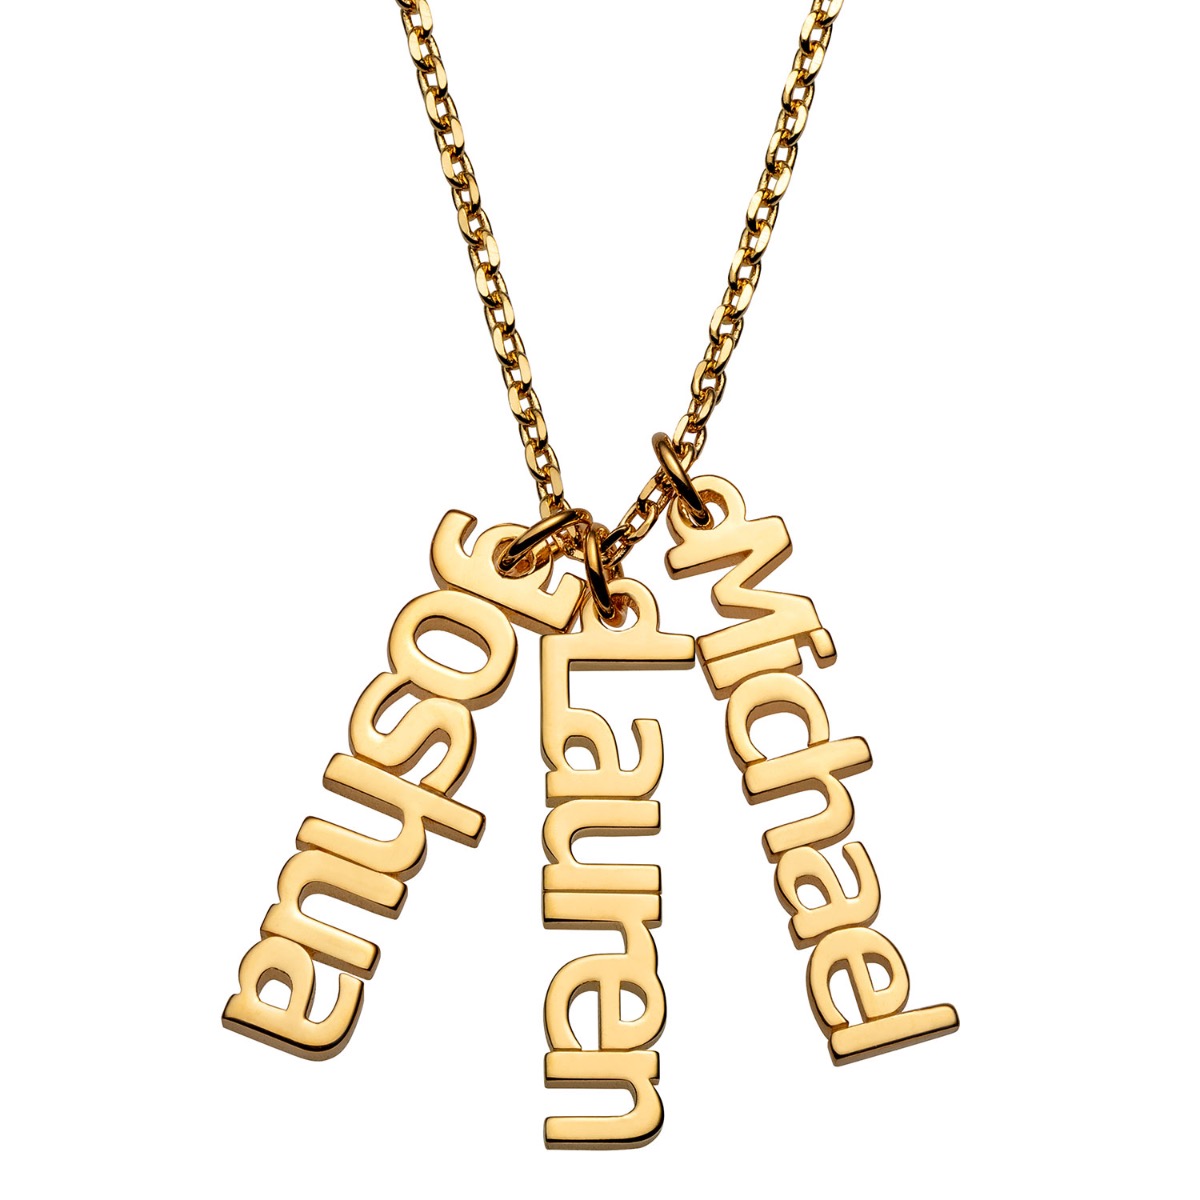 14K Gold over Sterling Petite Vertical Name Necklace - 3 Names